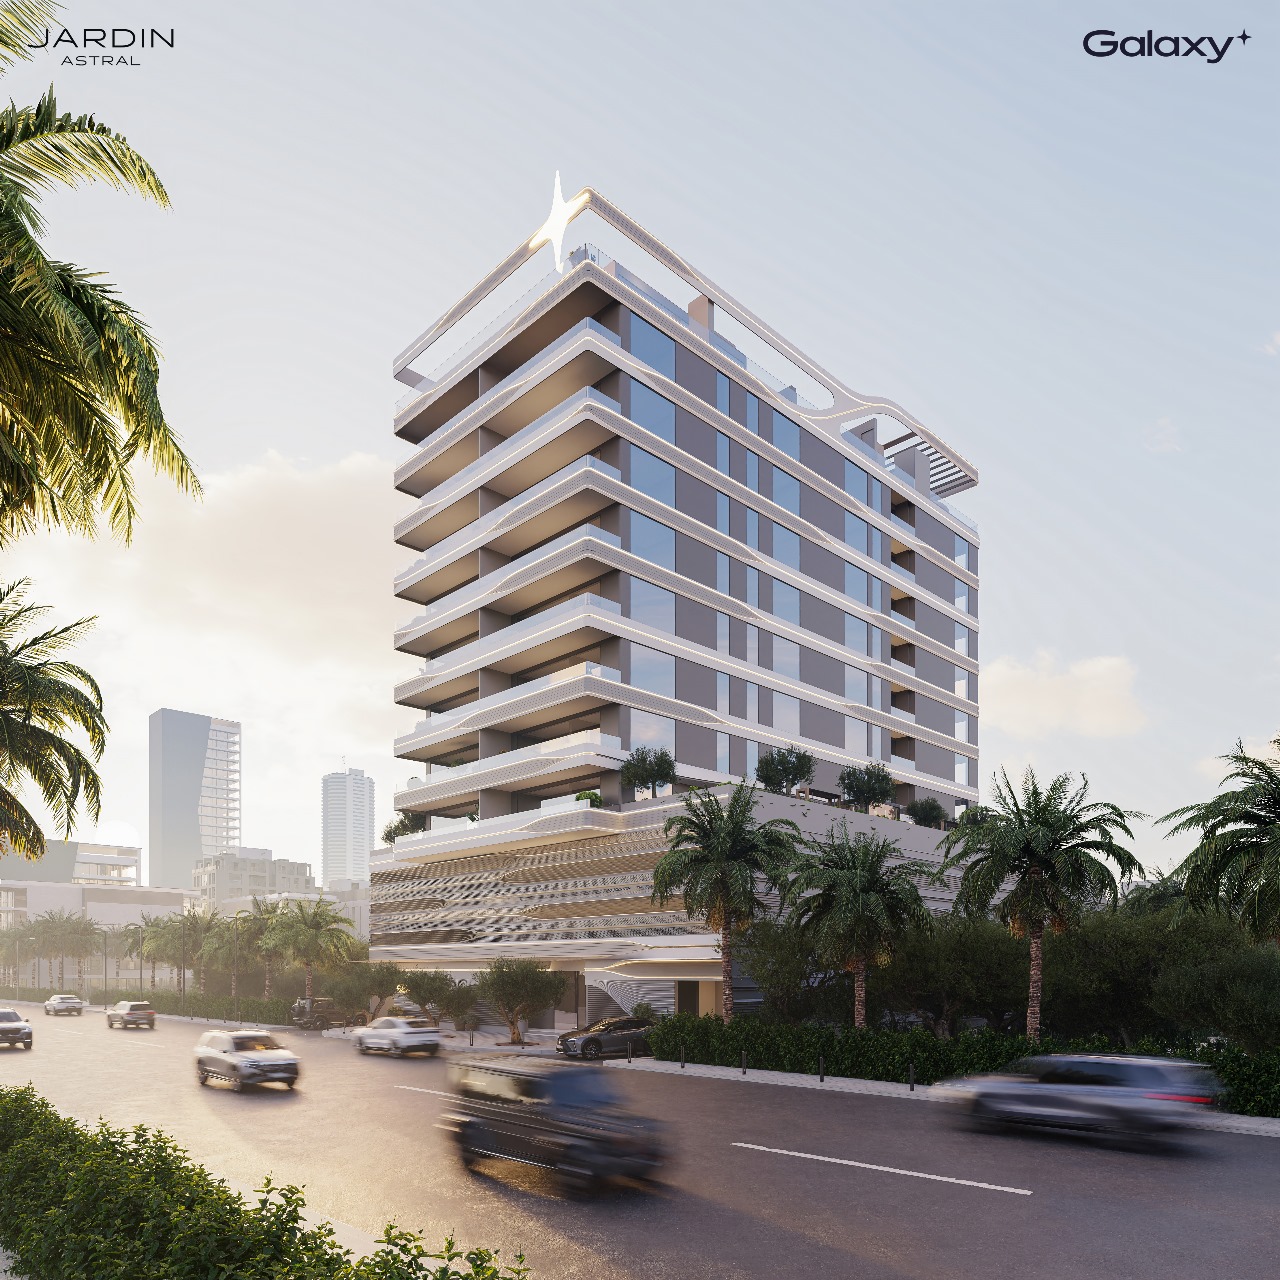 Jardin Astral by Galaxy Realty.